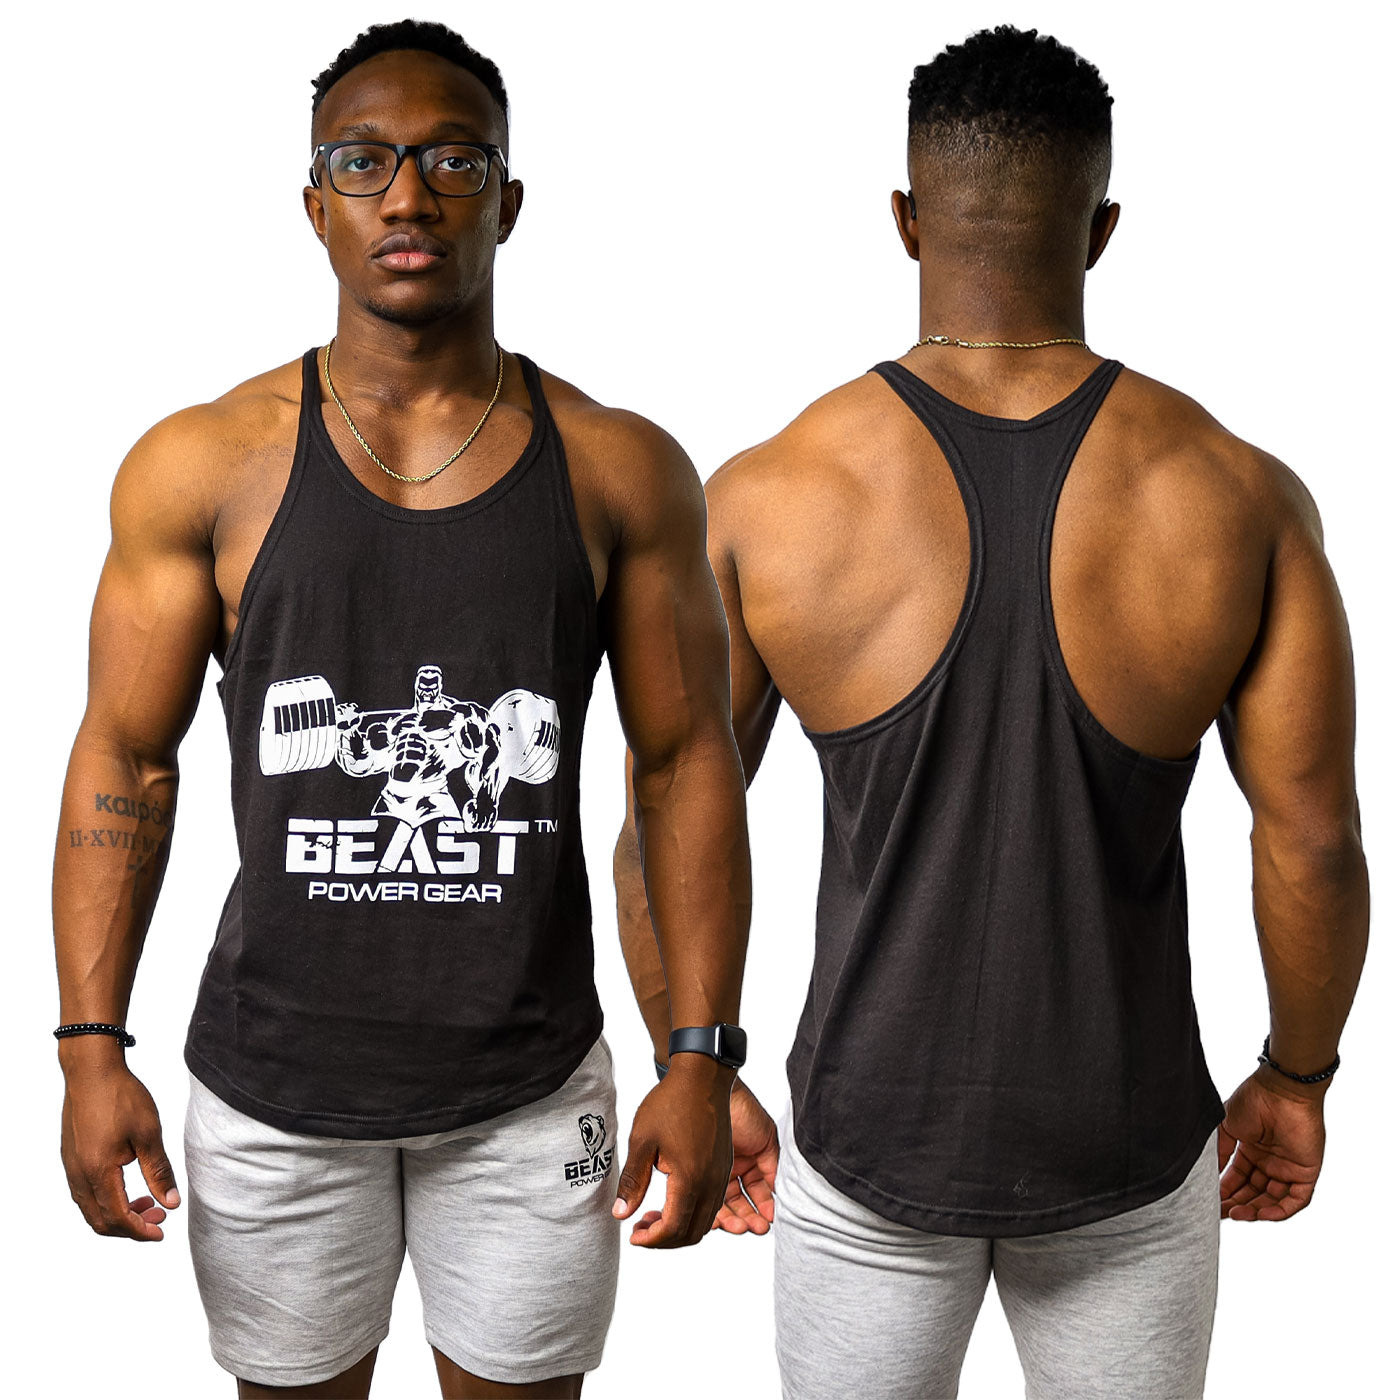 BLACK TANK TOP – Gymbrothers